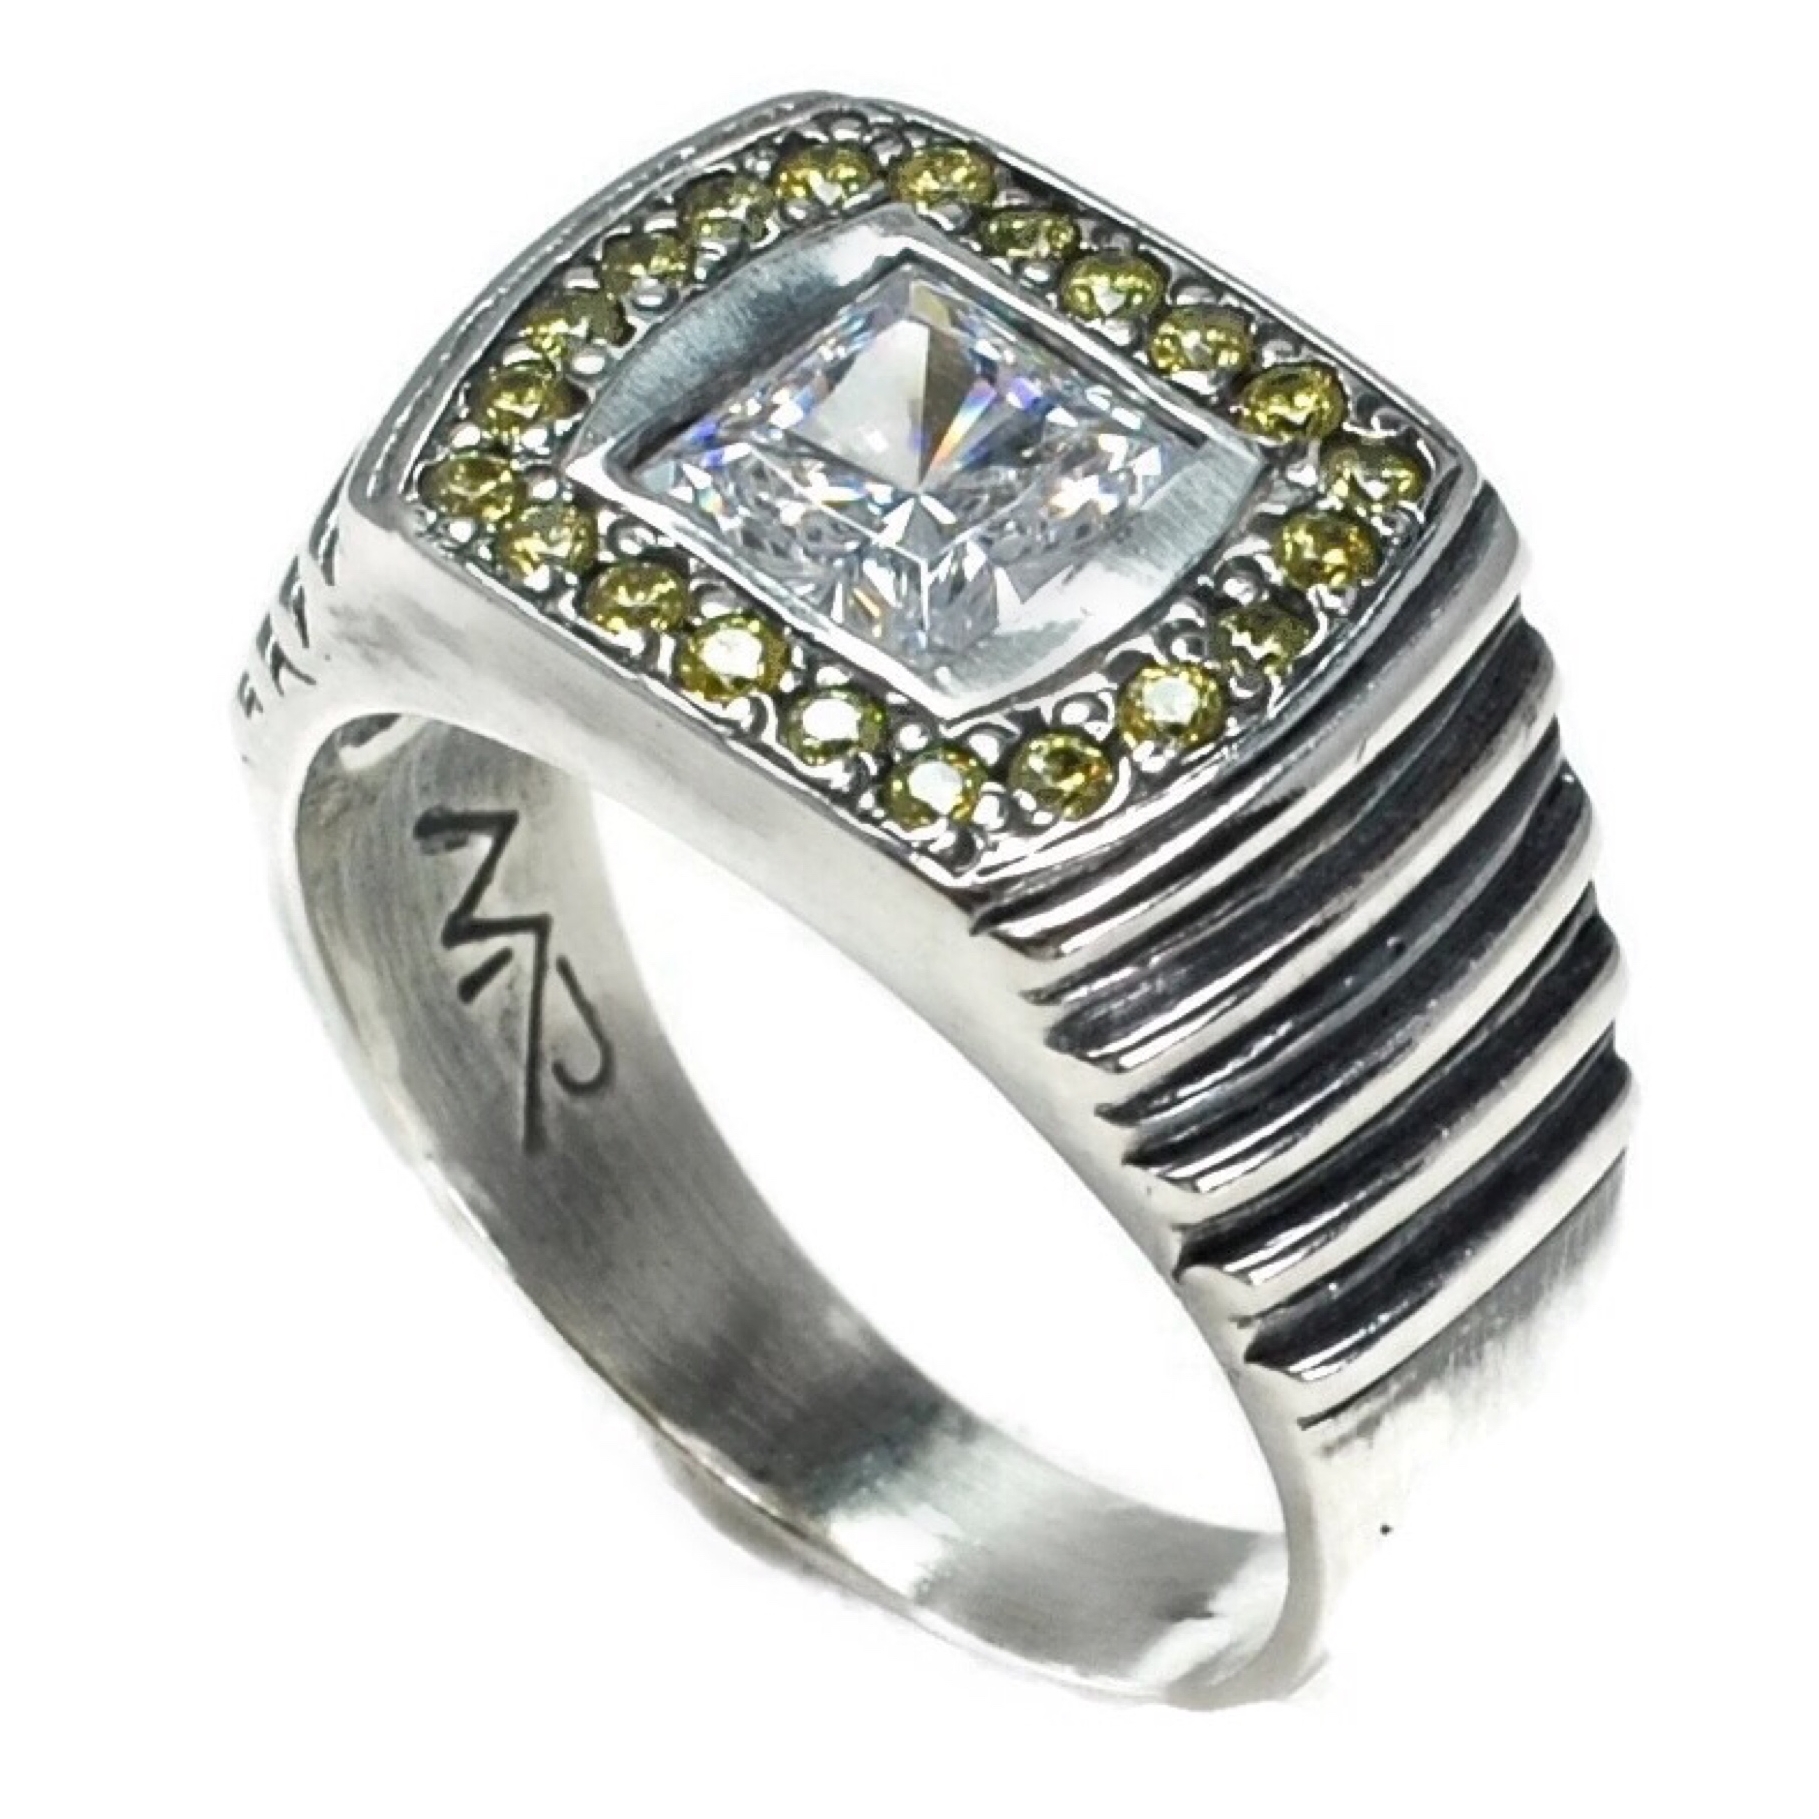 Citine and Emerald Cut Crystal Step Side RIng 12.JPG